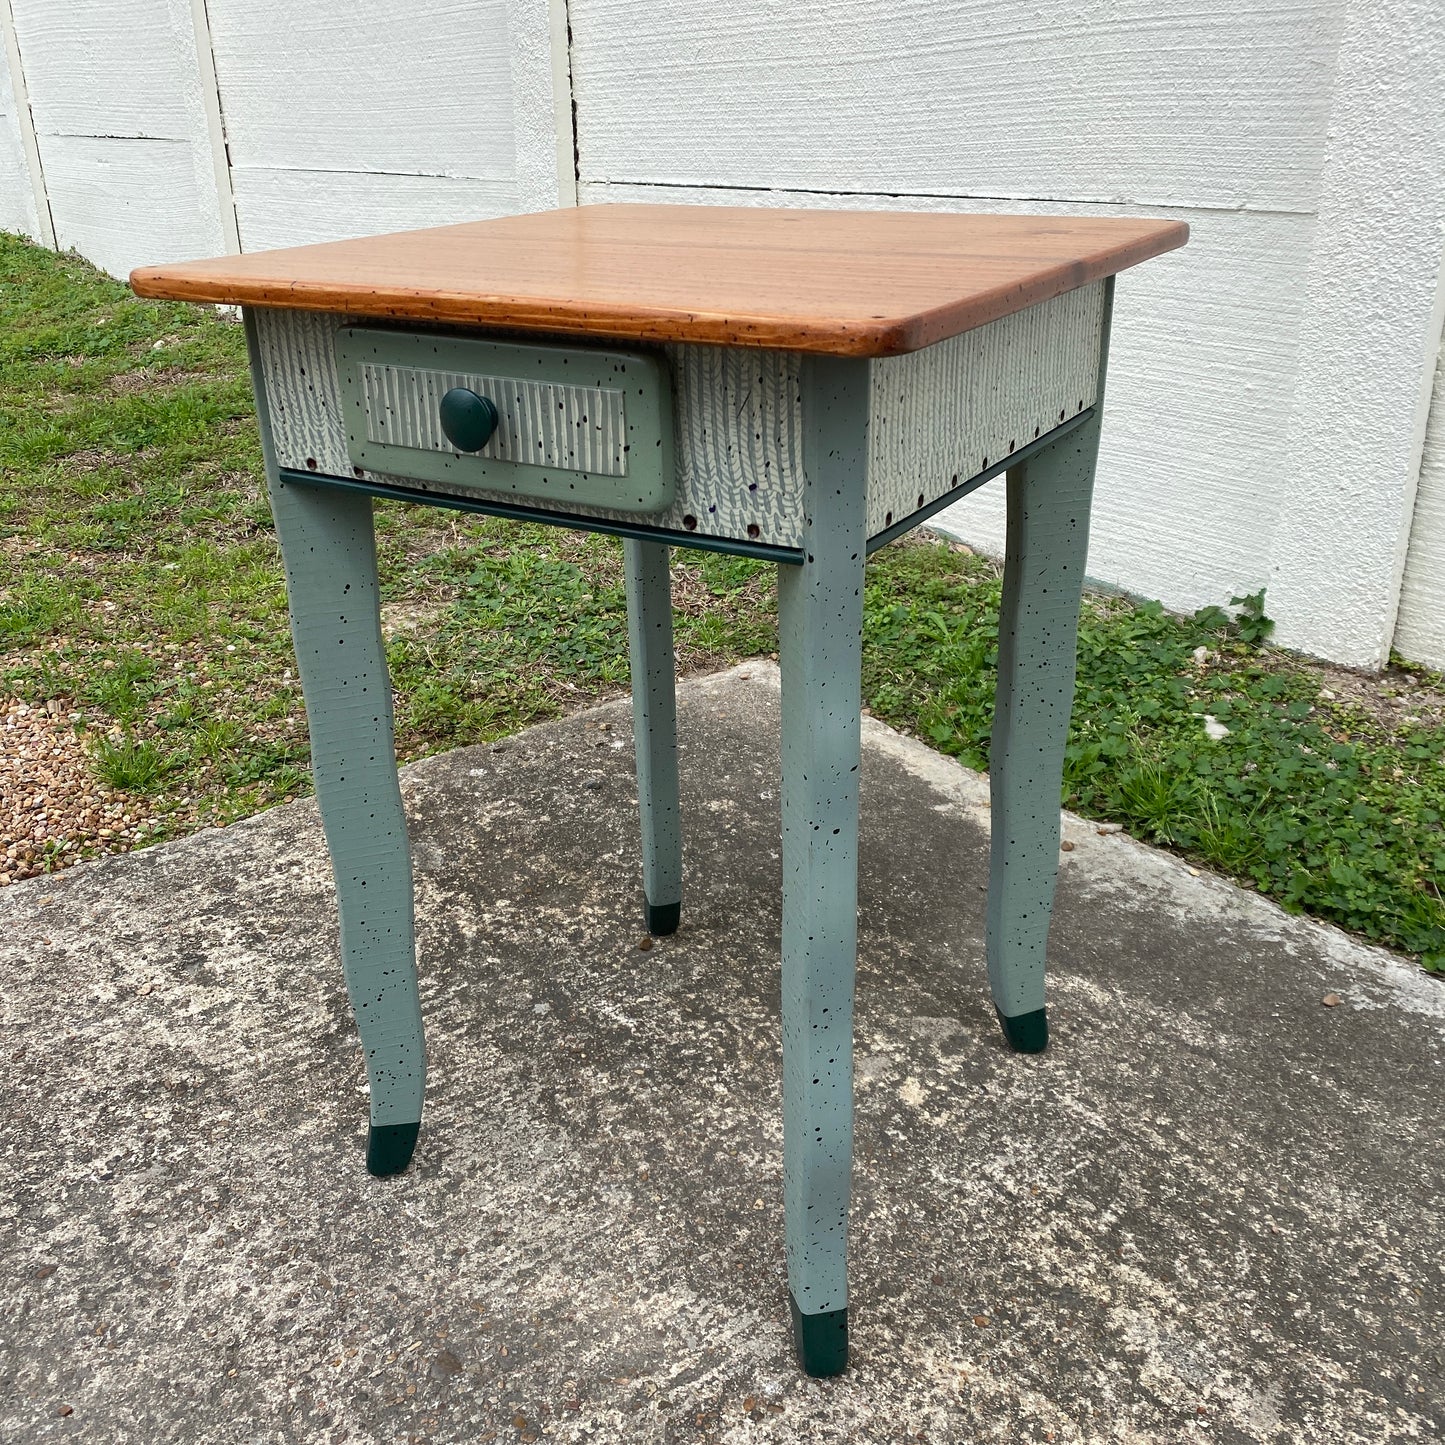 David Marsh 22” Side Table with Drawer